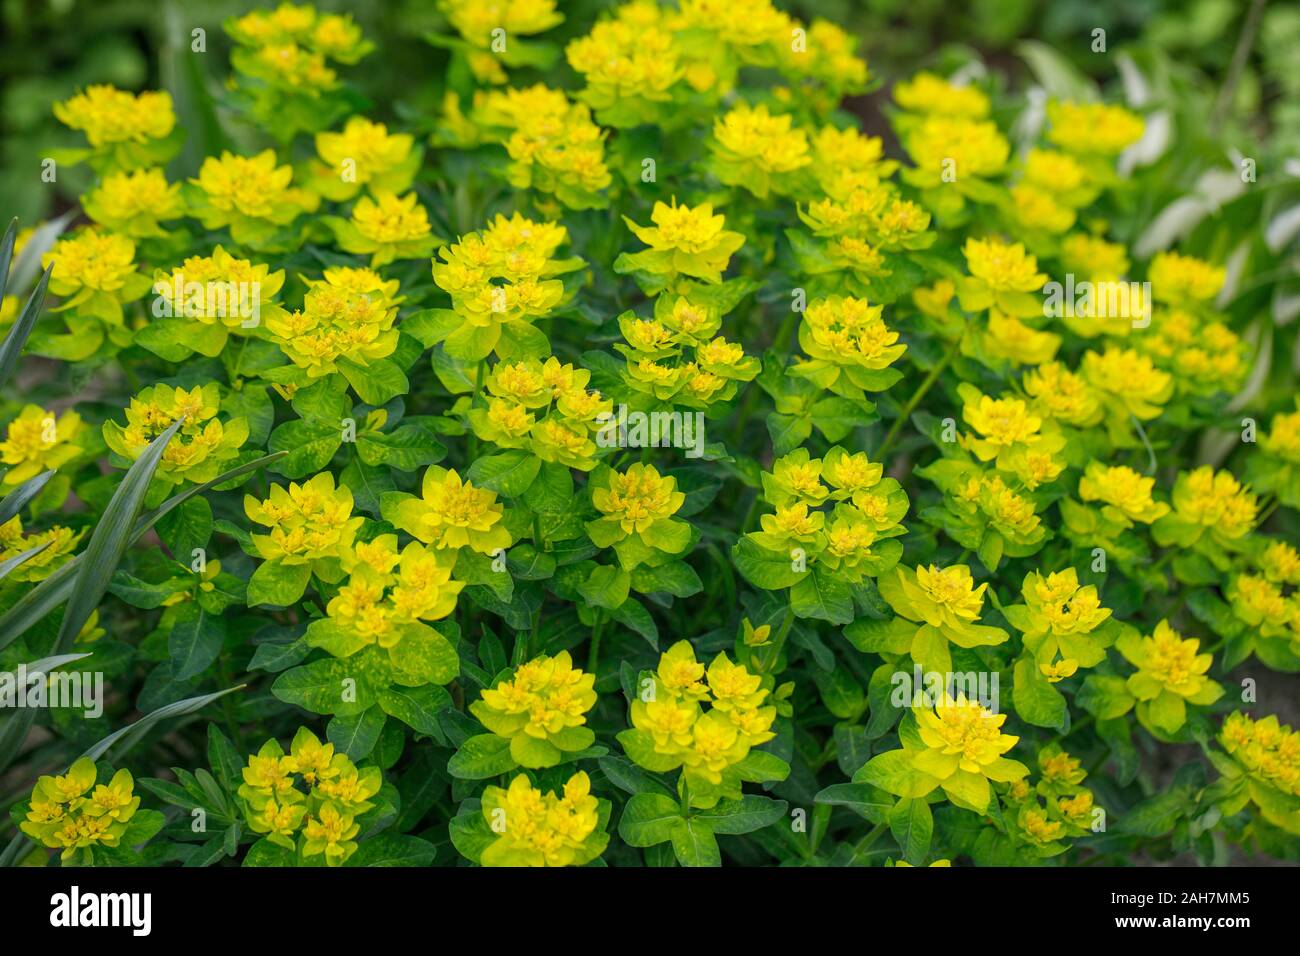 Bright yellow milkweed bushes on a green background in the garden. Cushion spurge, euphorbia epithymoides on a Sunny day. Garden decorative flowers. Stock Photo